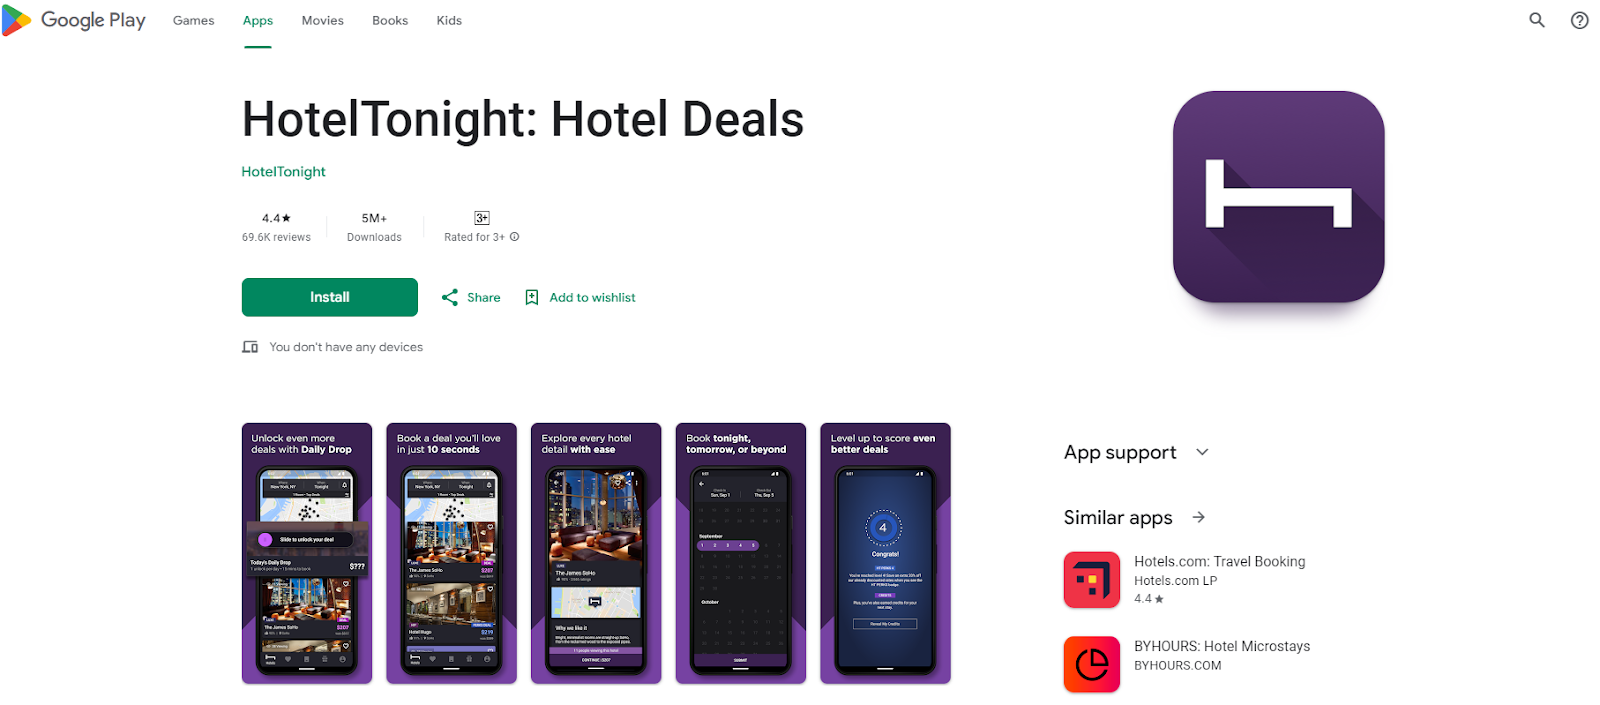 How to Download HotelTonight